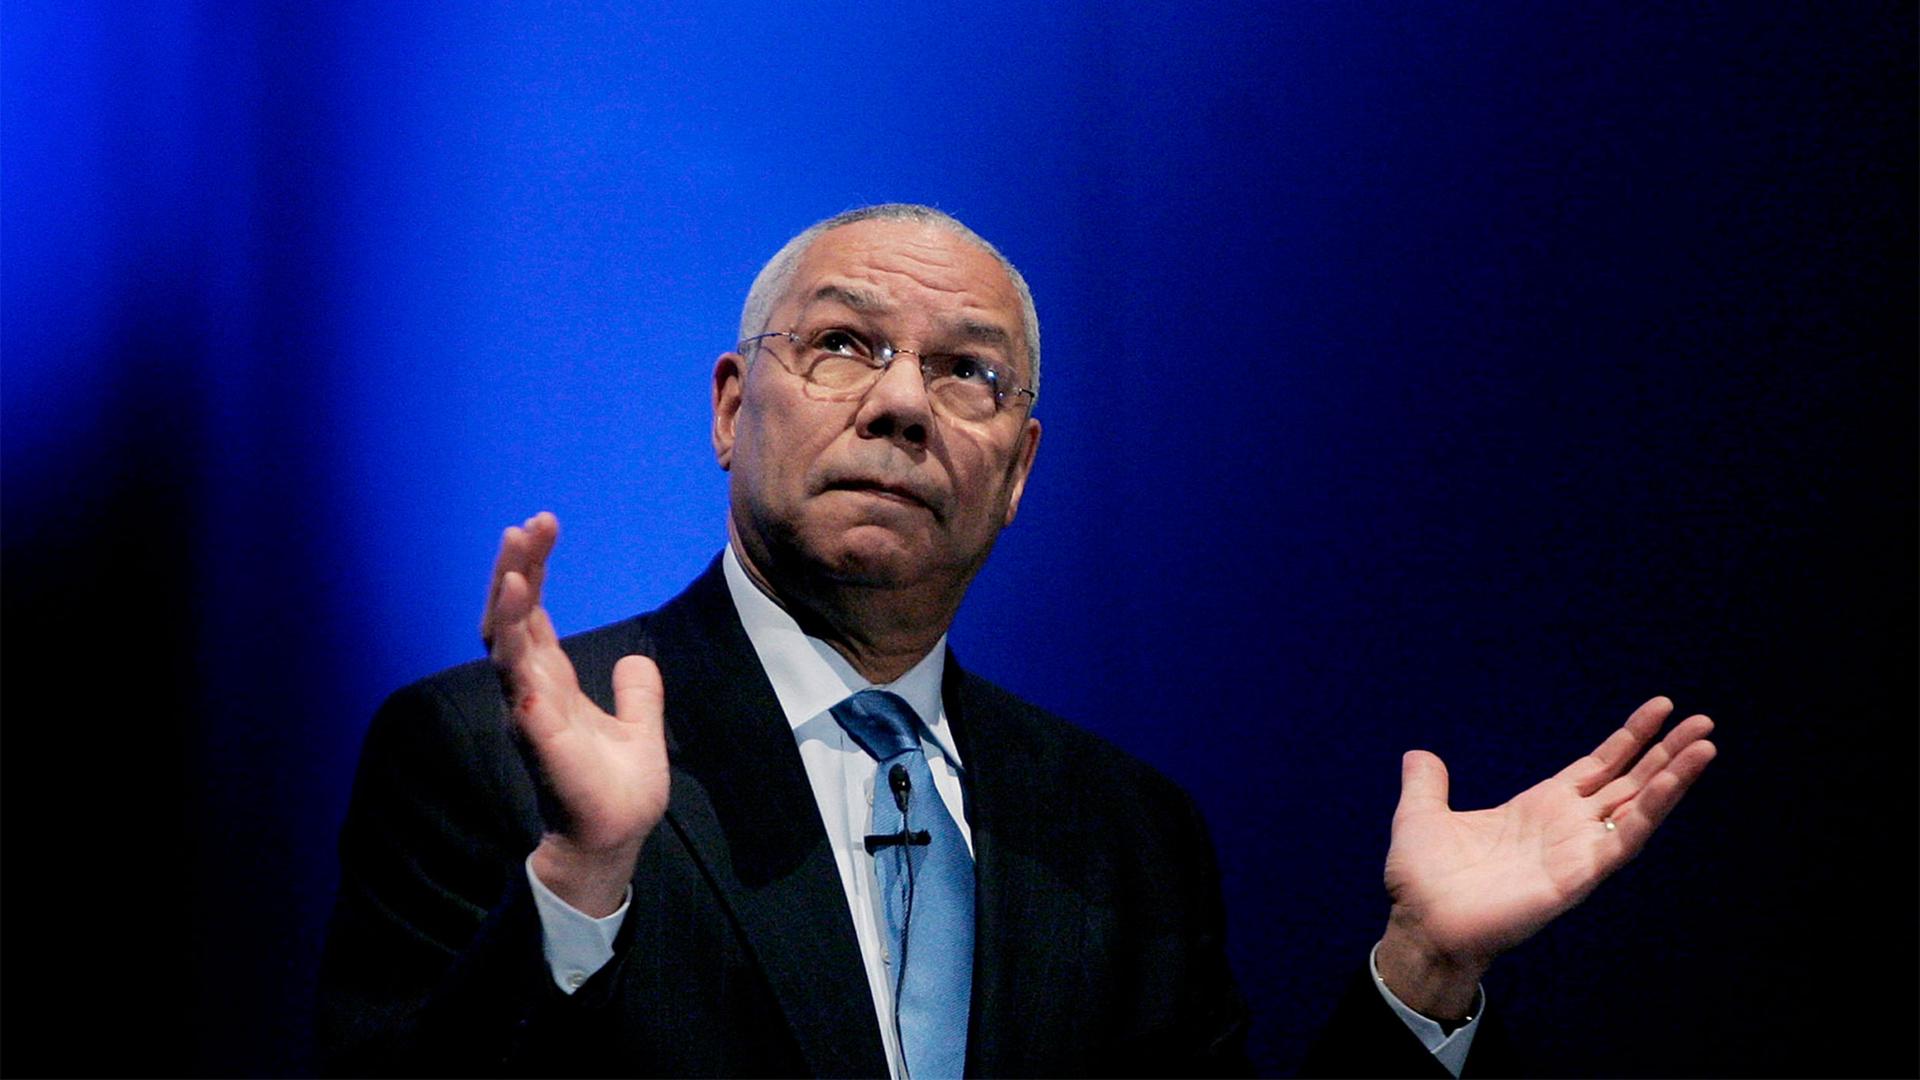 Former Secretary of State Colin Powell gestures during a lecture about business management and leadership in Madrid, Spain